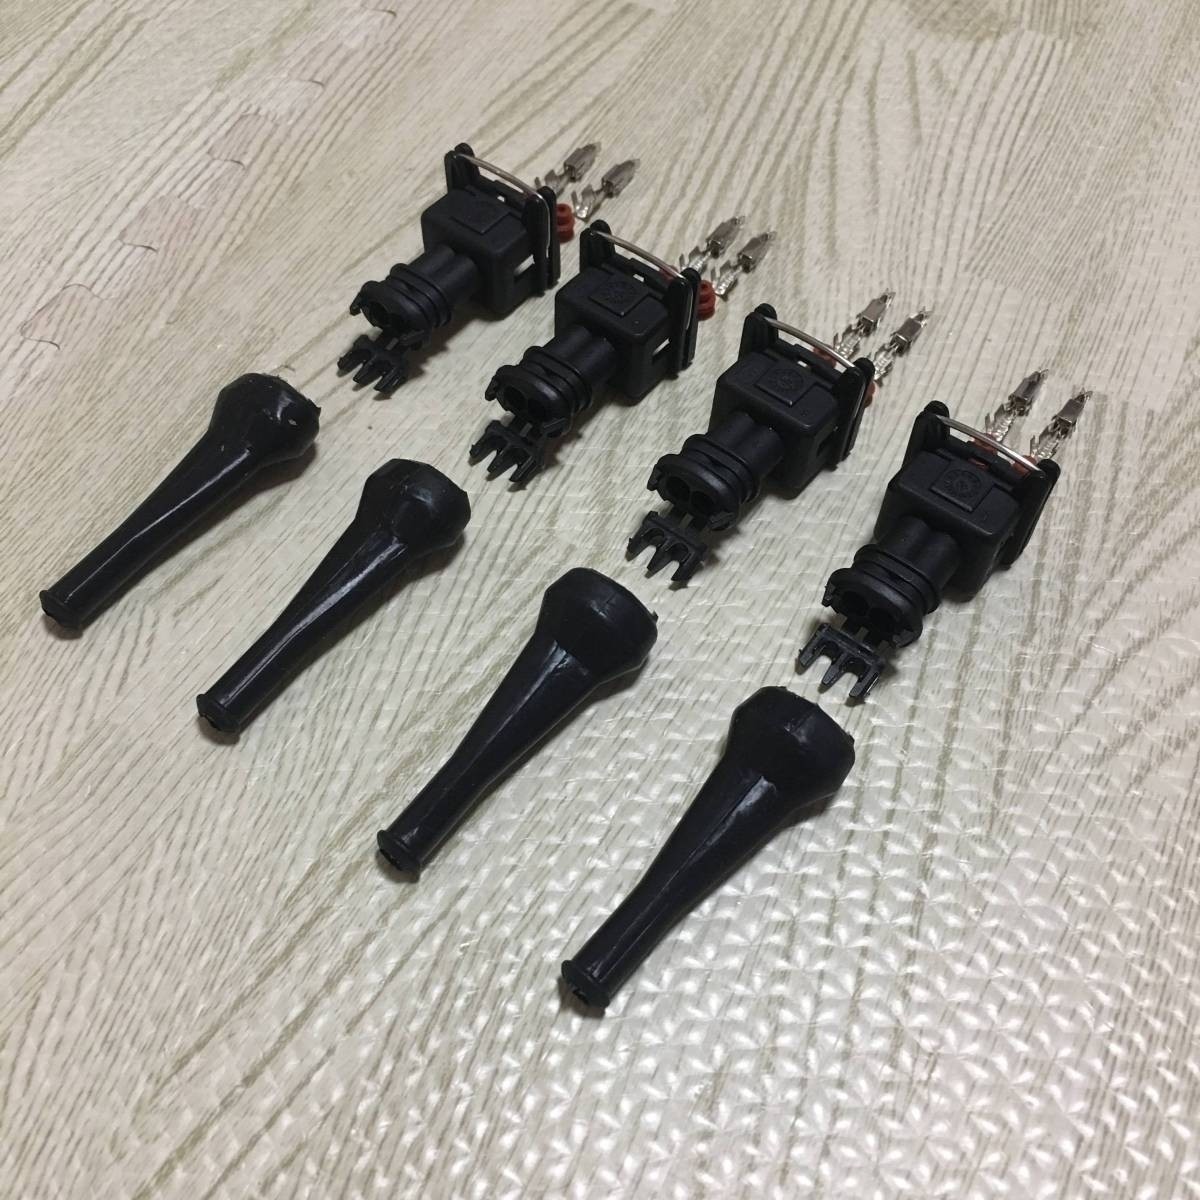  injector coupler connector one touch EV1 AE86 4AG L20 L28 FJ20 CA18 RB26 RB25 RB20 DENSO SR20 4G63 B16 B18 DENSO rectangle 